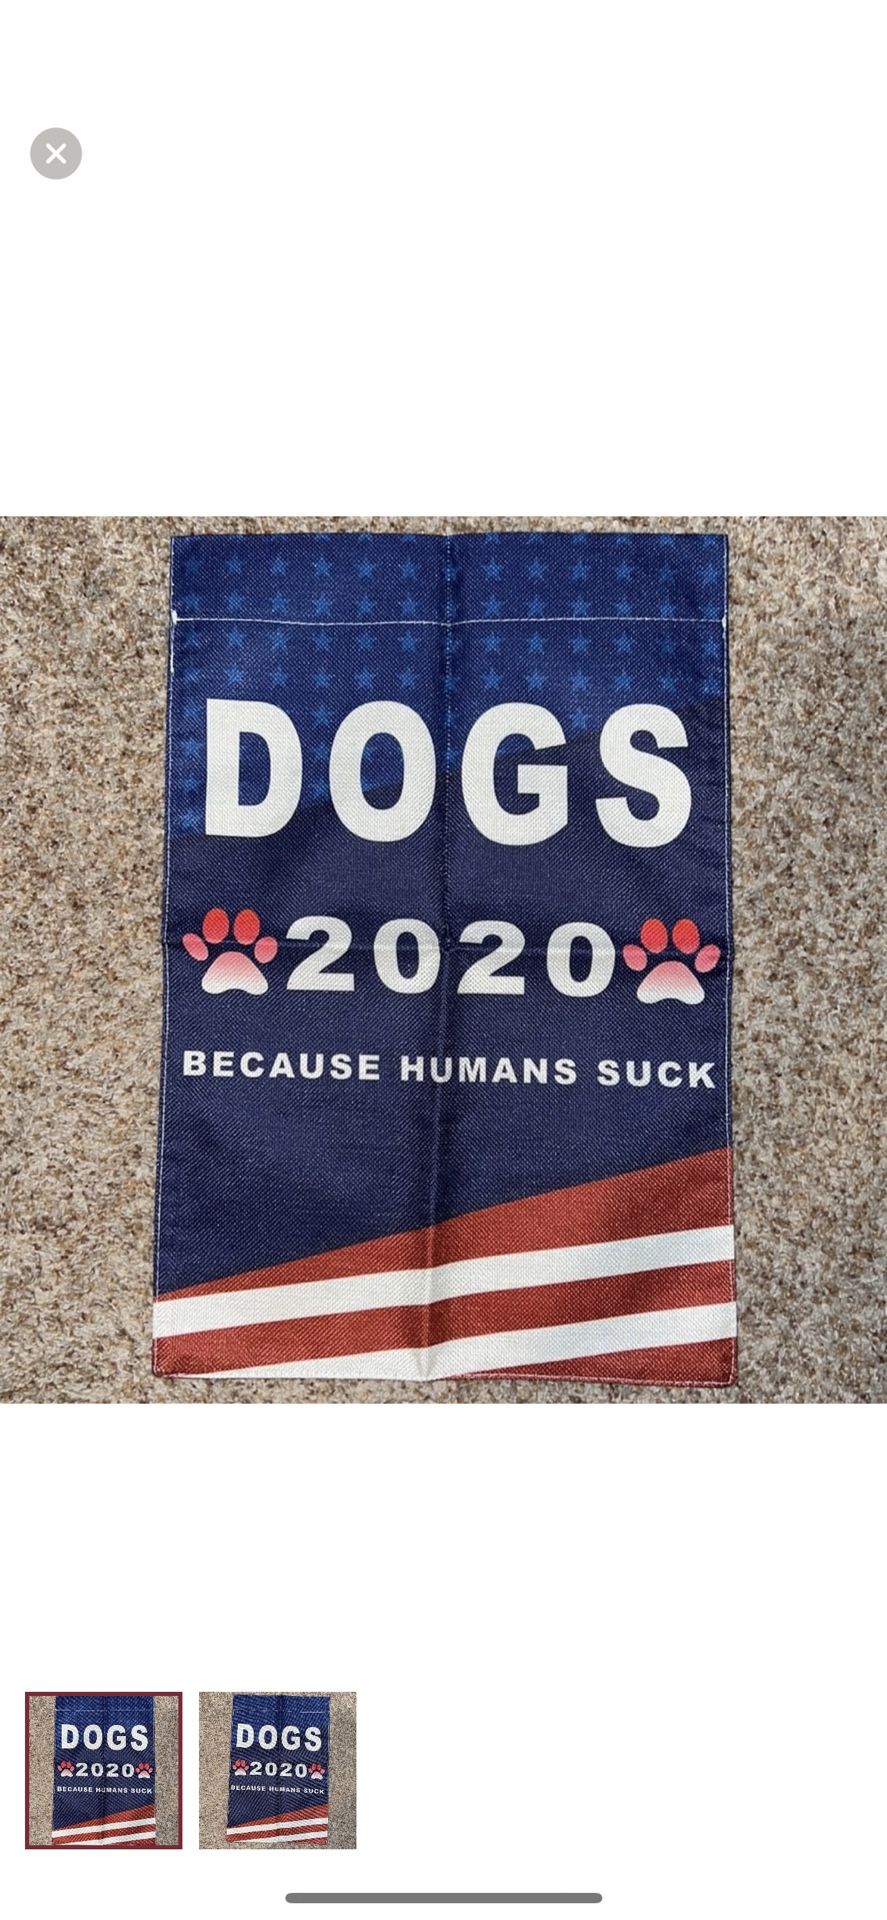 dogs 2020 because humans suck funny 2020 political presidential campaign yard flag indoor and outdoor courtyard decorative flag 12.5in x 18in